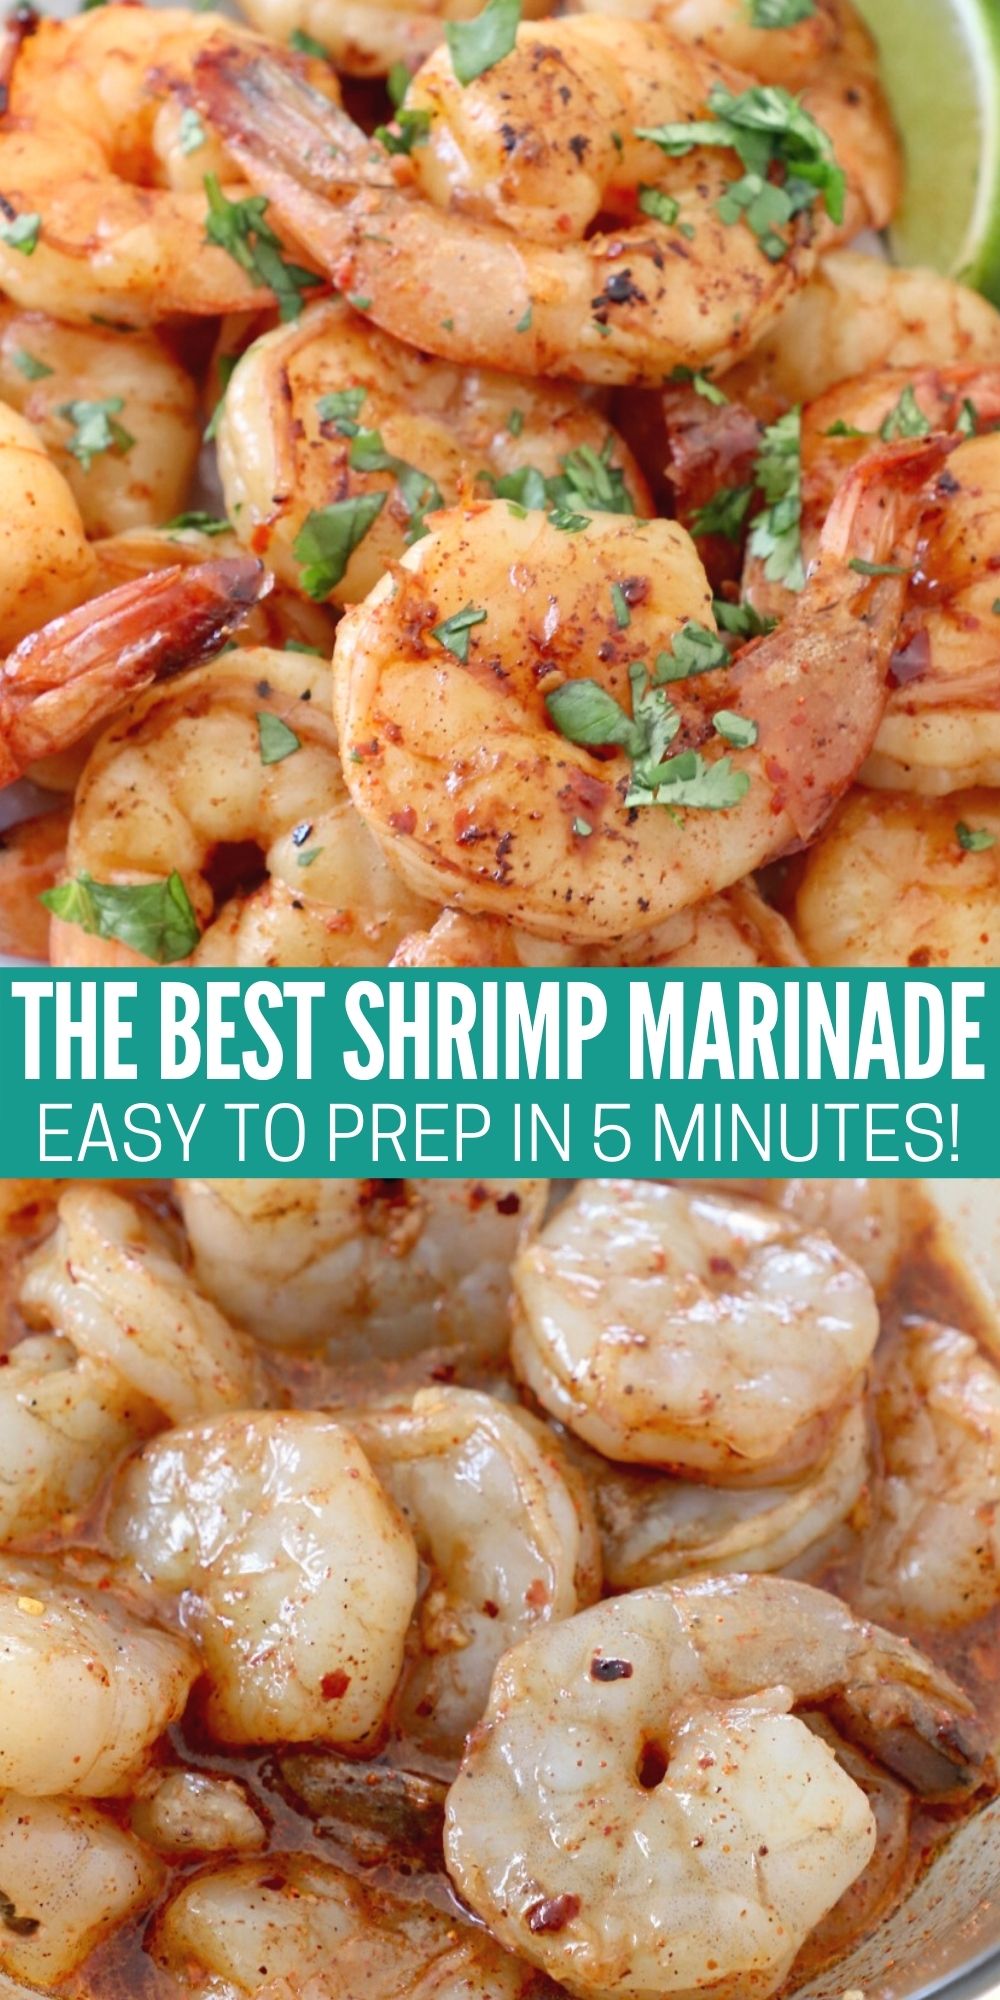 The BEST Grilled Shrimp Marinade Recipe - WhitneyBond.com